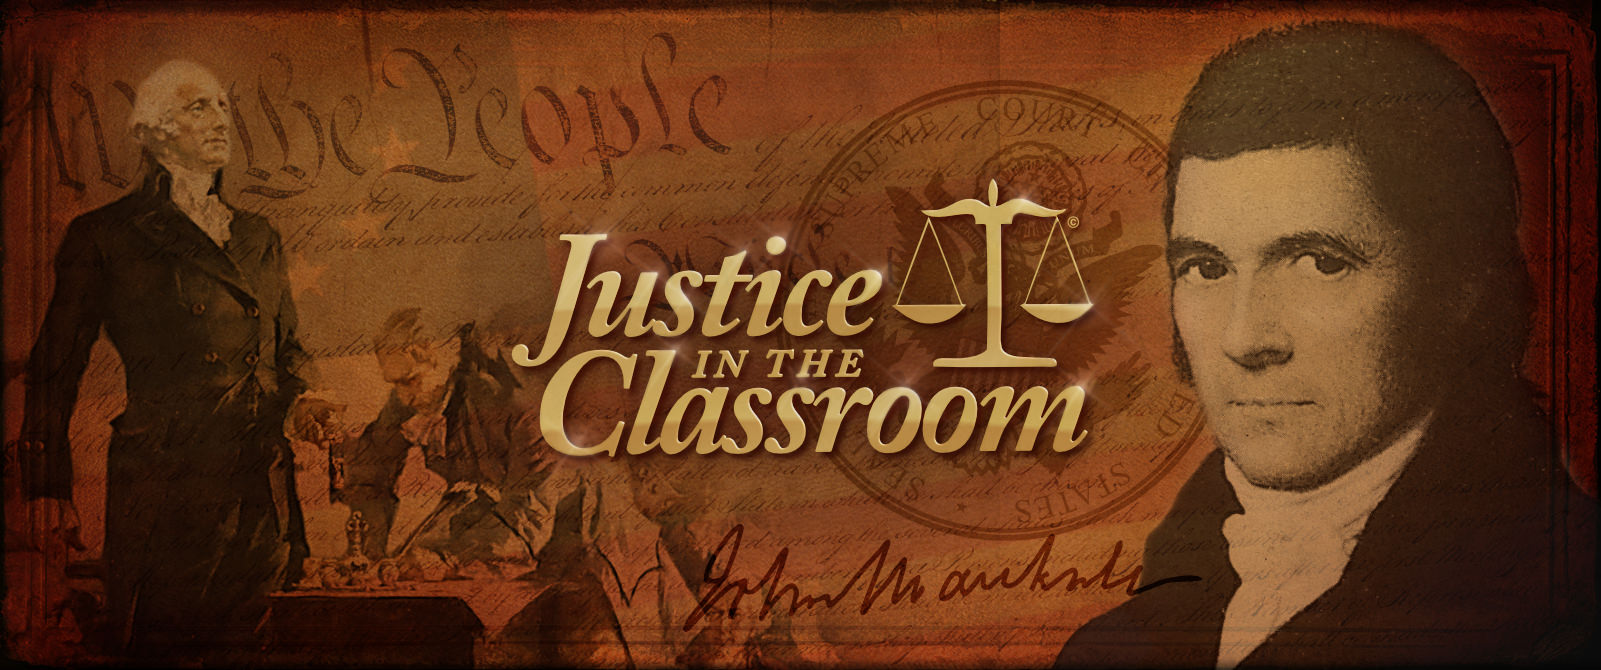 Justice in the Classroom homepage and John Marshall